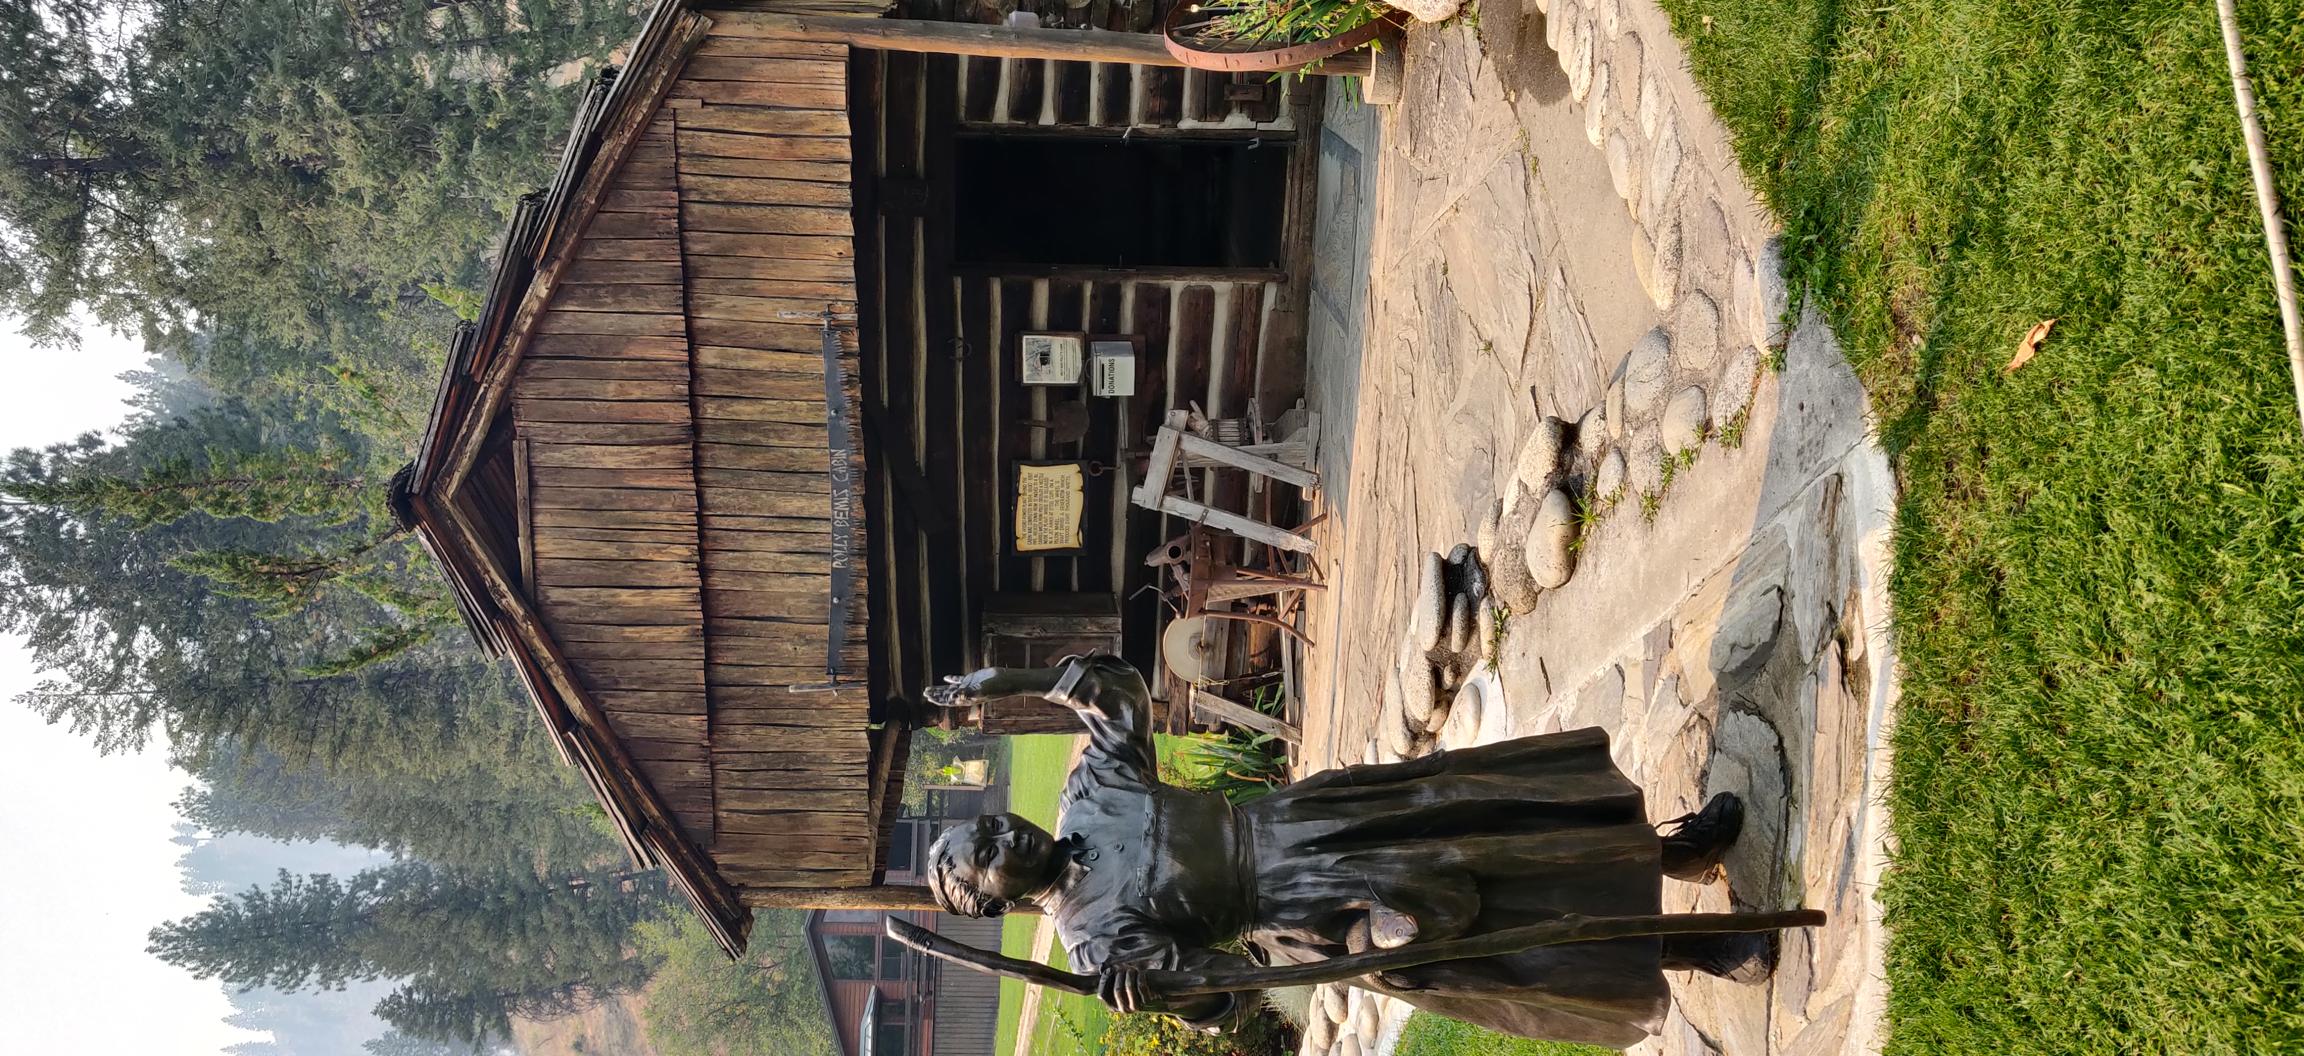 Bronze statue of a settler Polly Bemis in front of her historic homestead. She was originally an indentured servant whose freedom was allegedly won during a poker game by her future husband Charlie Bemis.